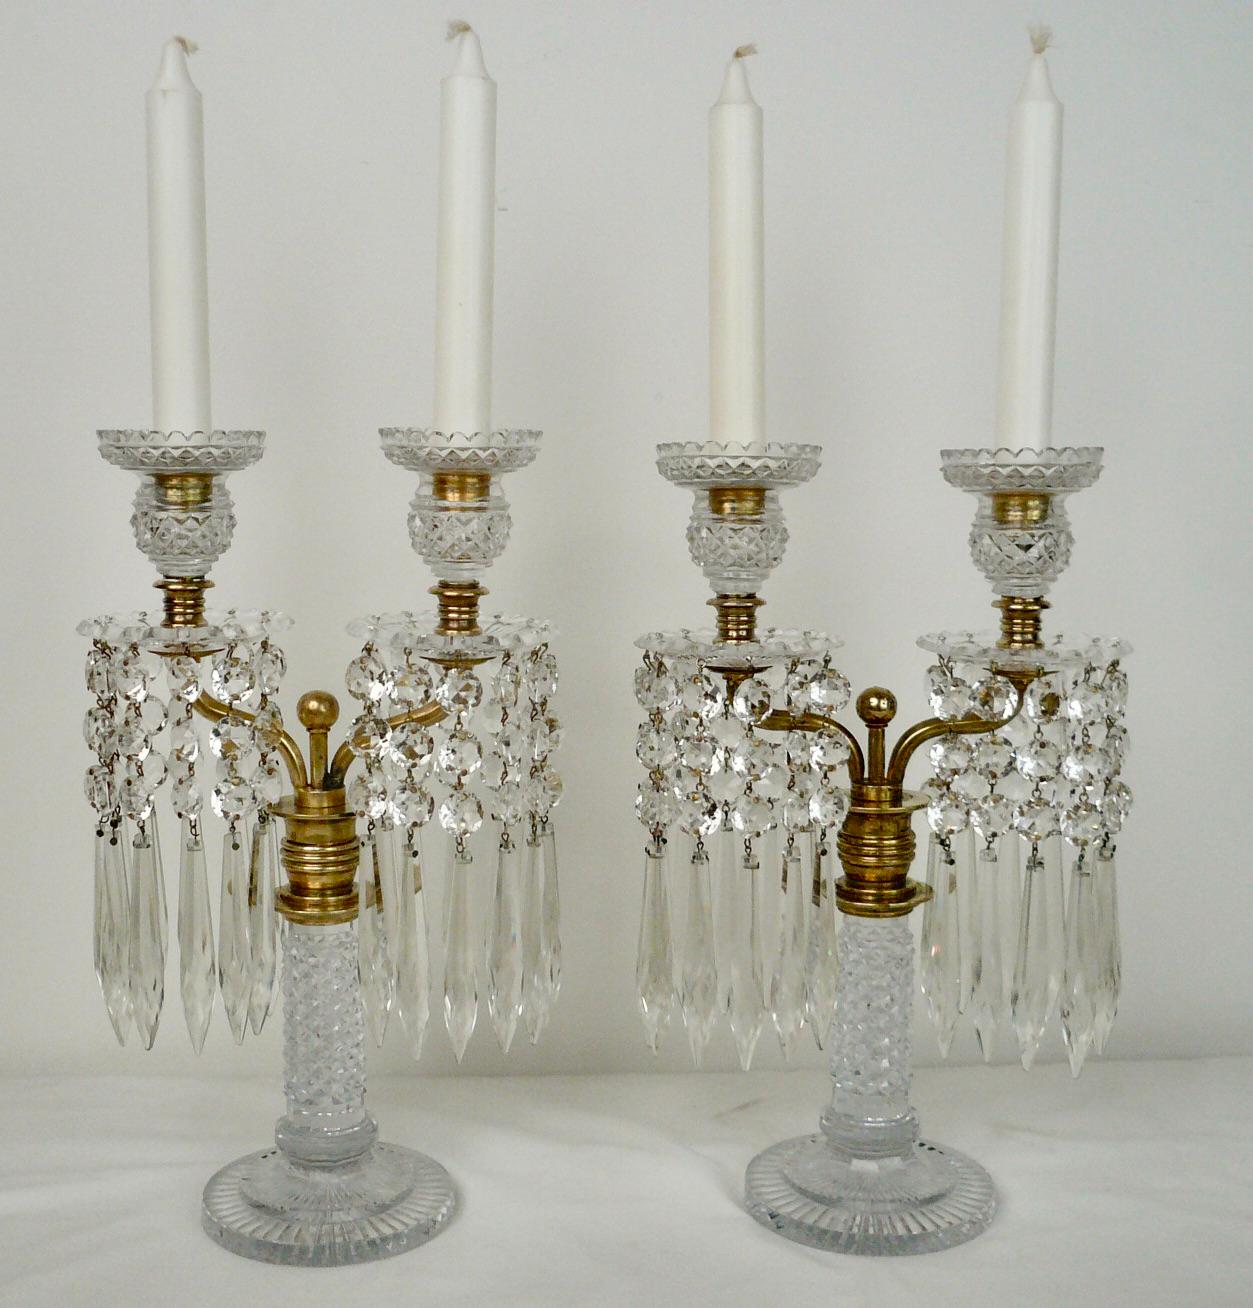 Pair English Regency Cut Glass Candelabra or Lustres Attributed to John Blades For Sale 2